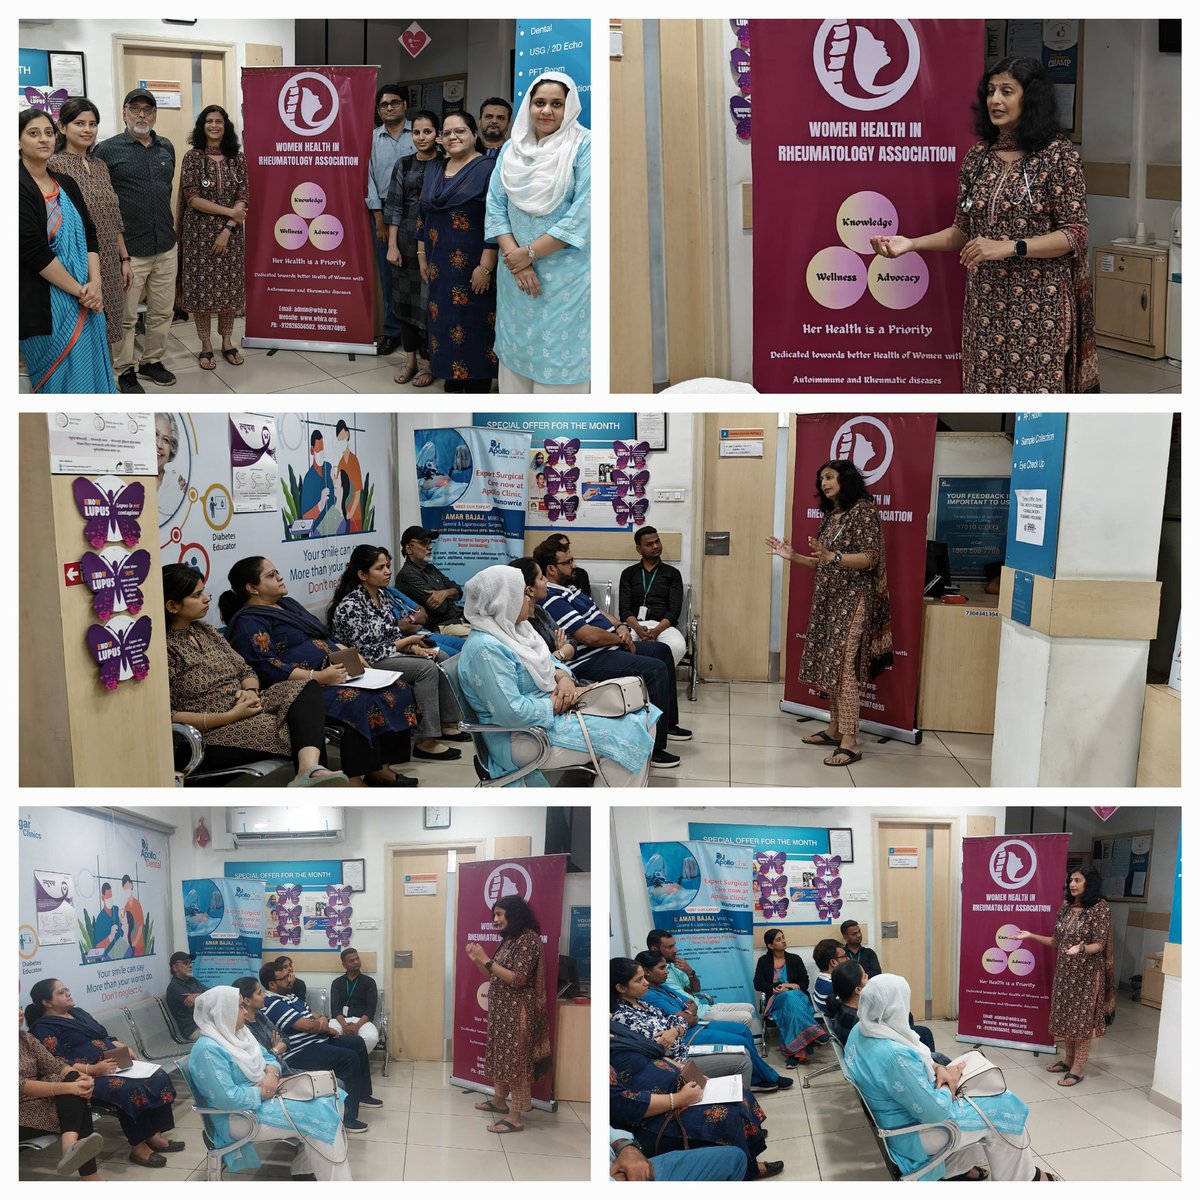 Conducted a Lupus awareness camp in my clinic.Talked about early symptoms of lupus and how to diagnose it. Clinic staff needs to be sensitized to this disease for early referrals and better treatment plans. #lupusawarenessmonth #worldlupusday #RheumTwitter